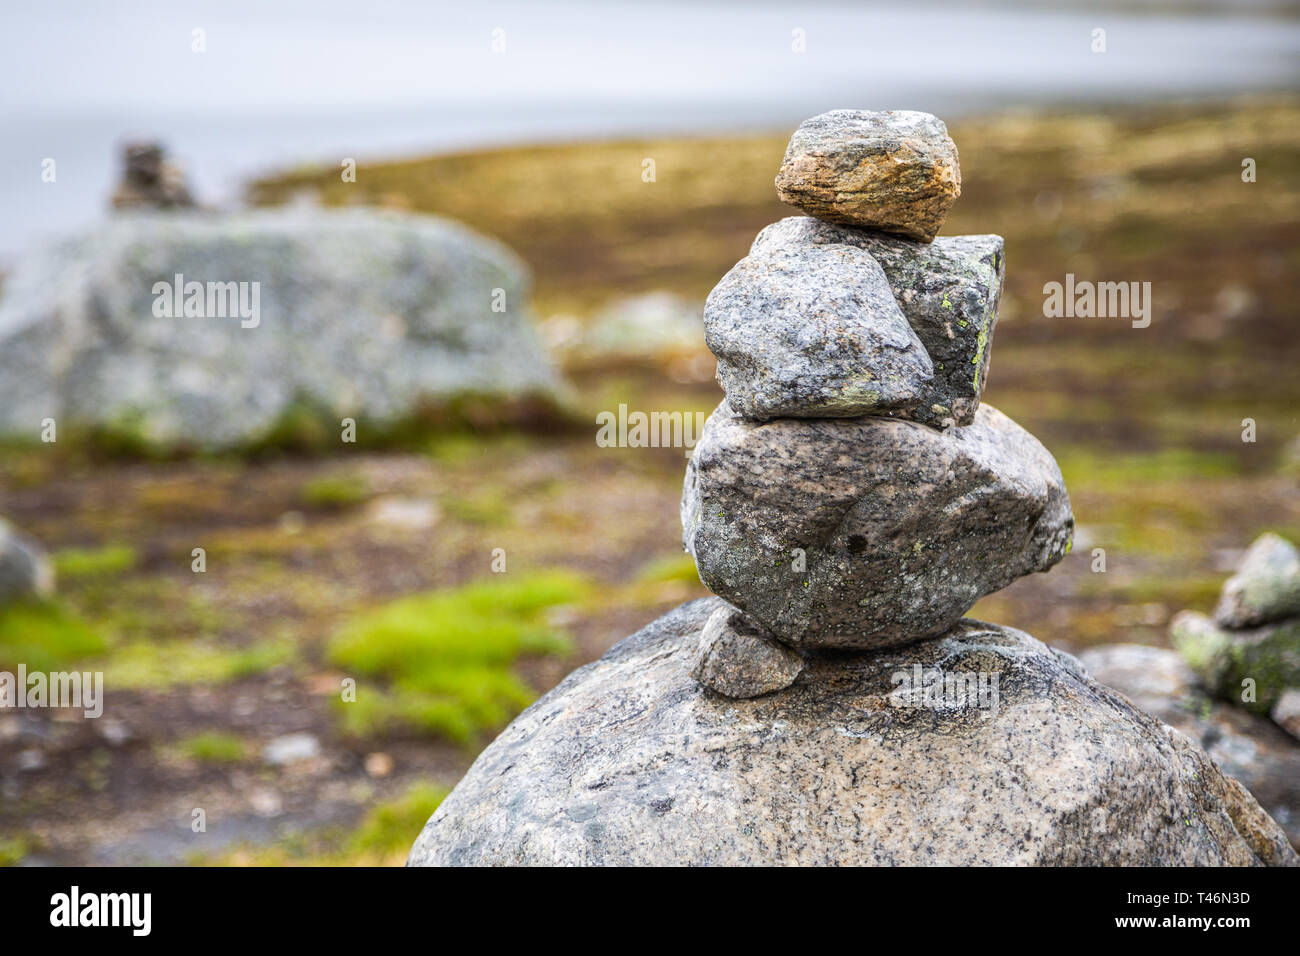 Piled stones are houses for Norwegian fairytale trolls. Troll house made from stones. Tourists are building troll houses out of stones, according to l Stock Photo